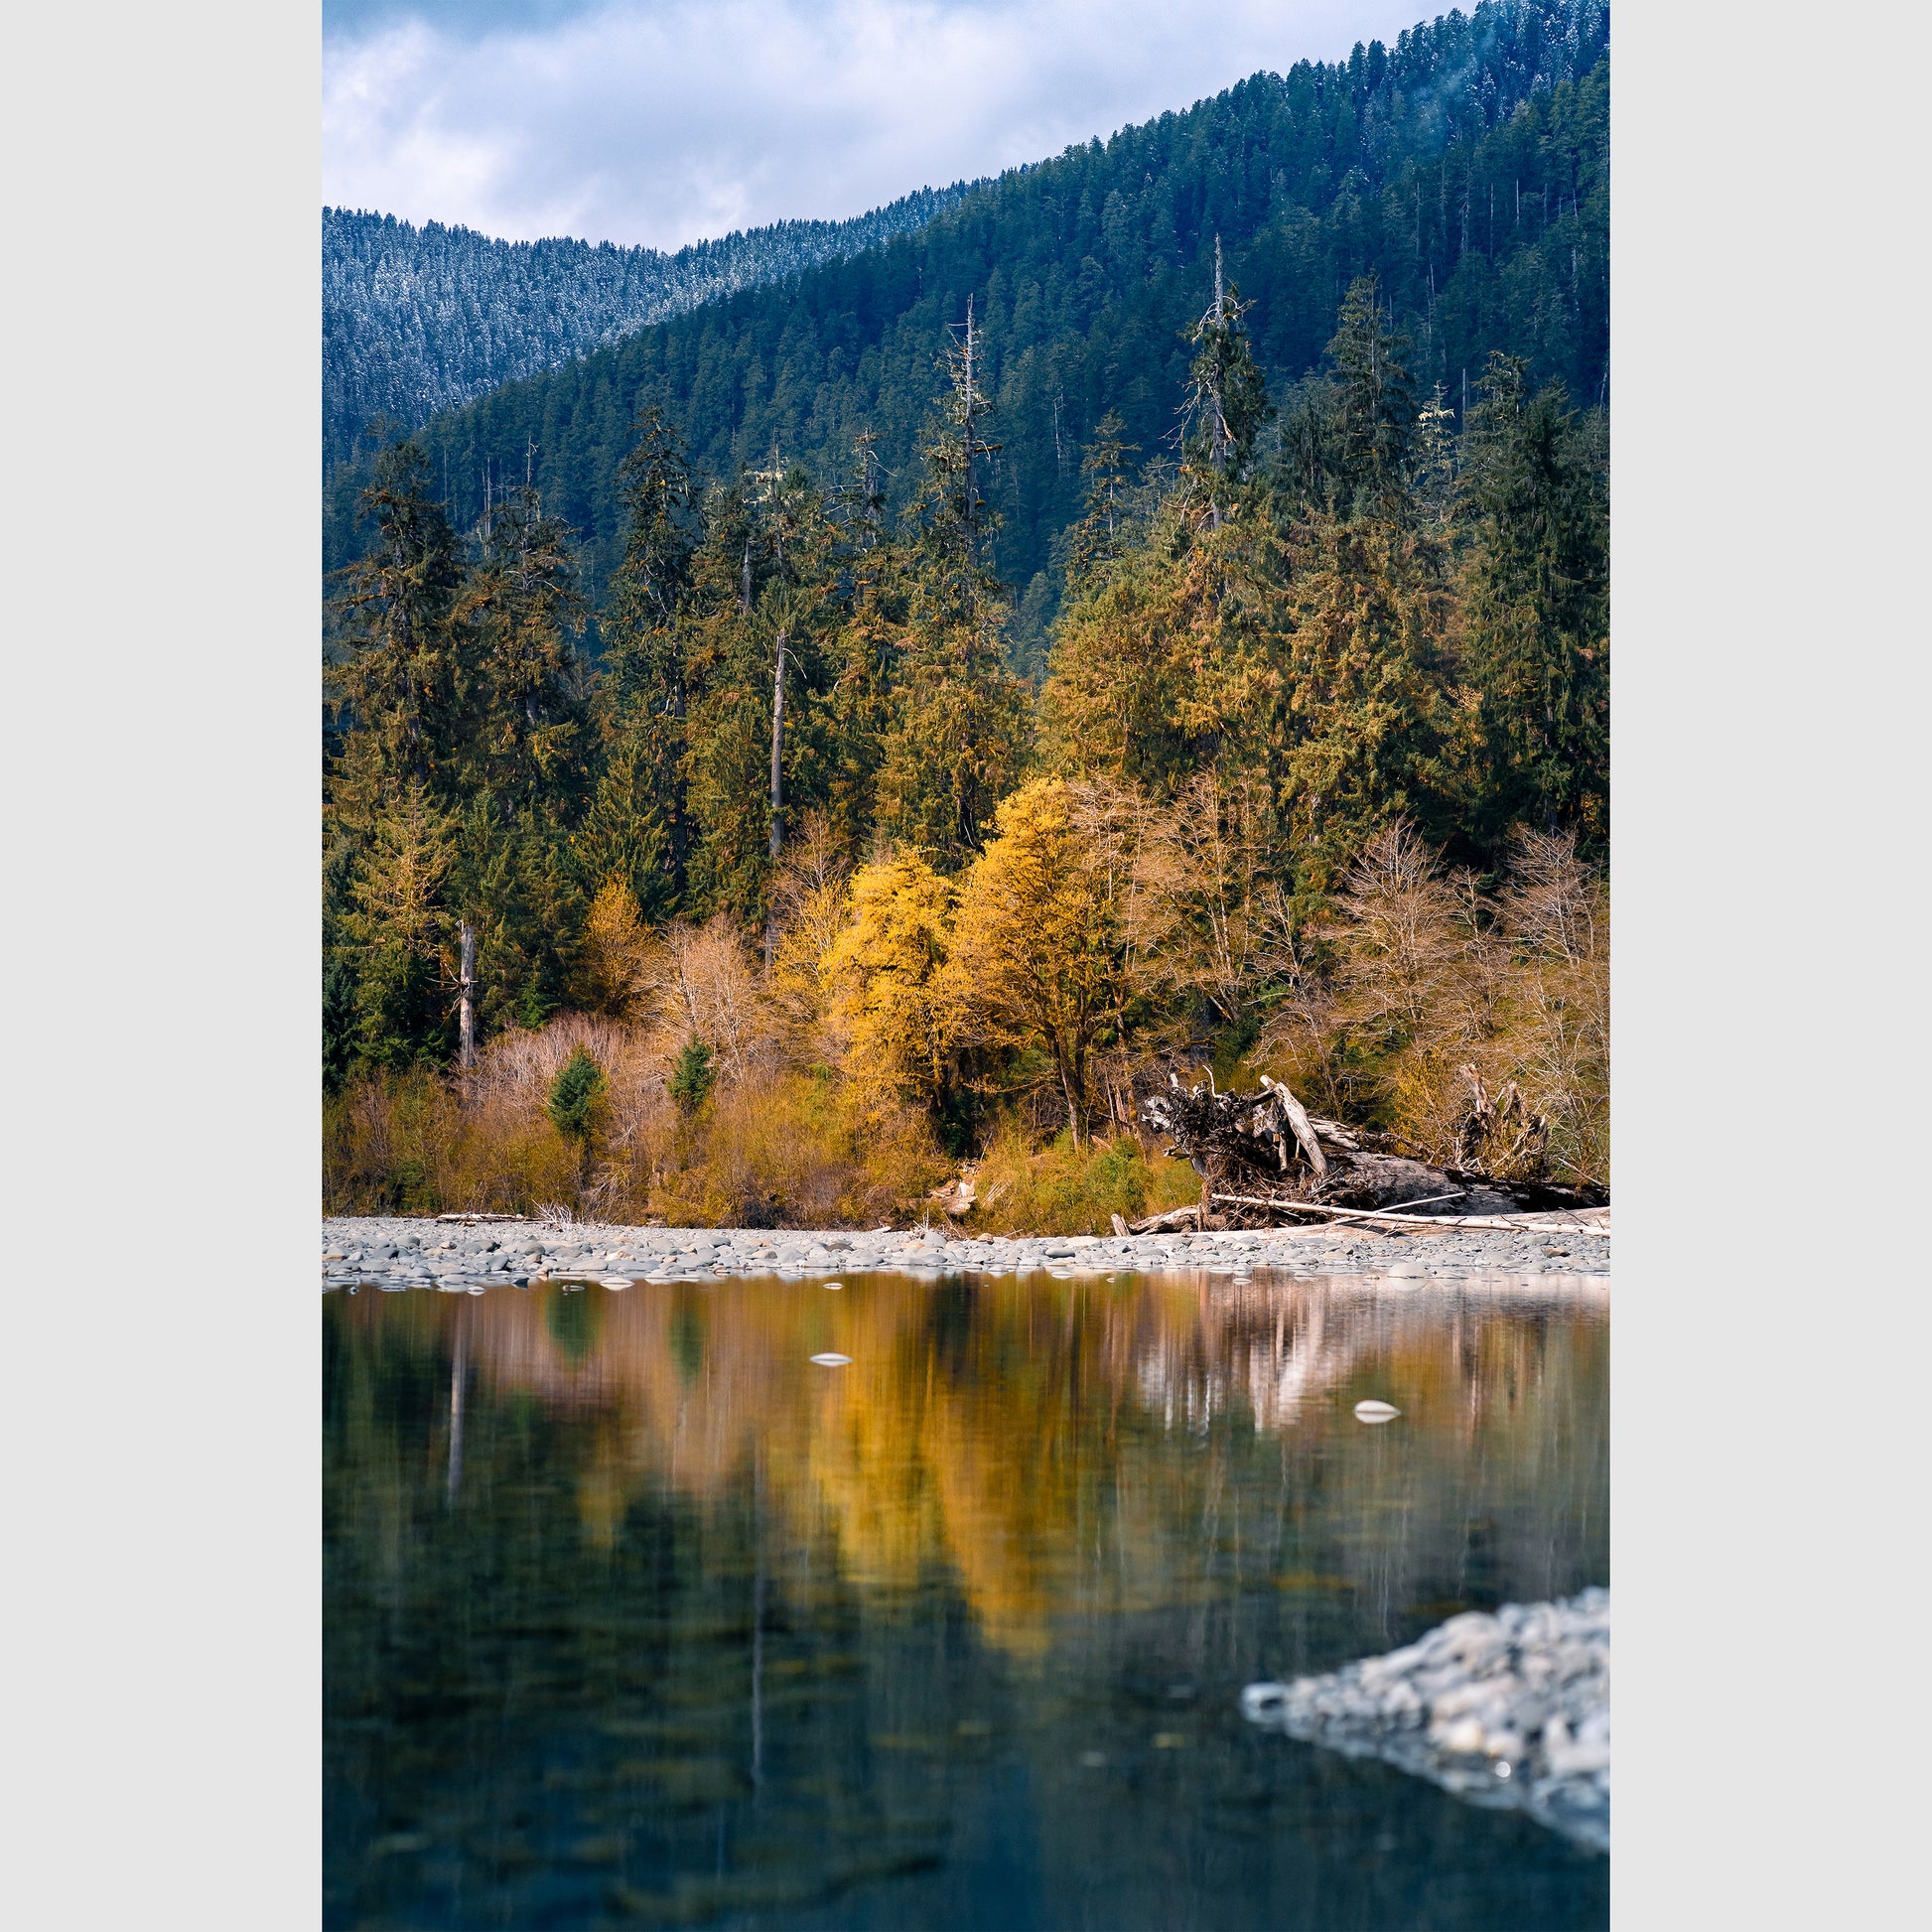 River Dream - Vannopics, Day, Hoh Rain Forest, Olympic National Forest, Vertical, Washington